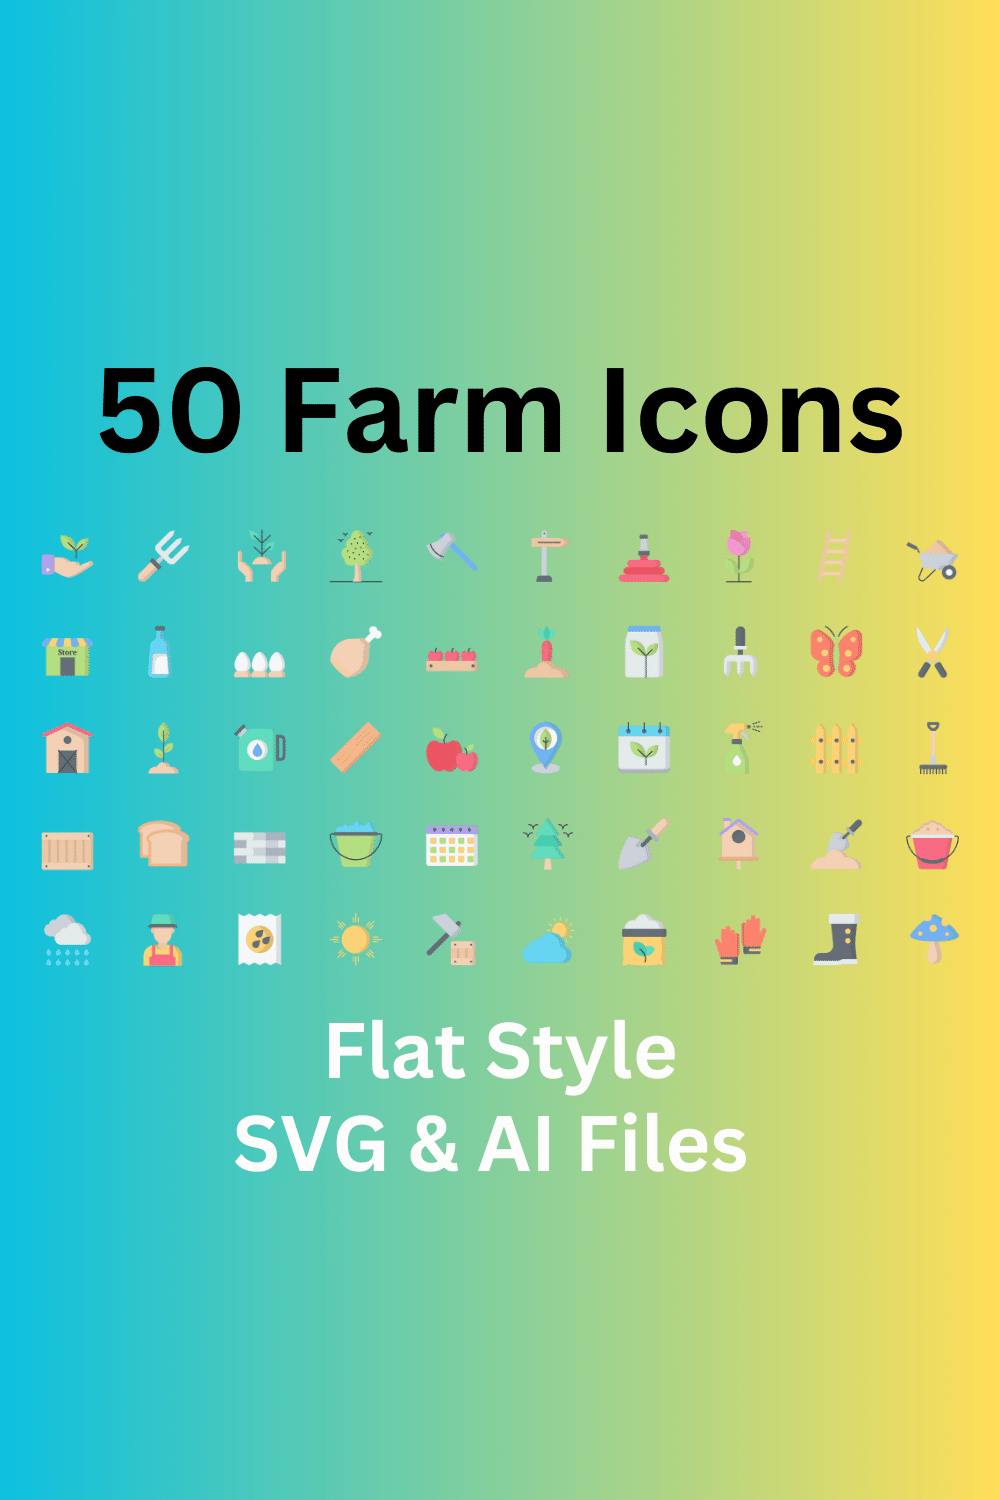 Carpentry Icon Set 50 Flat Icons - SVG And AI Files pinterest preview image.